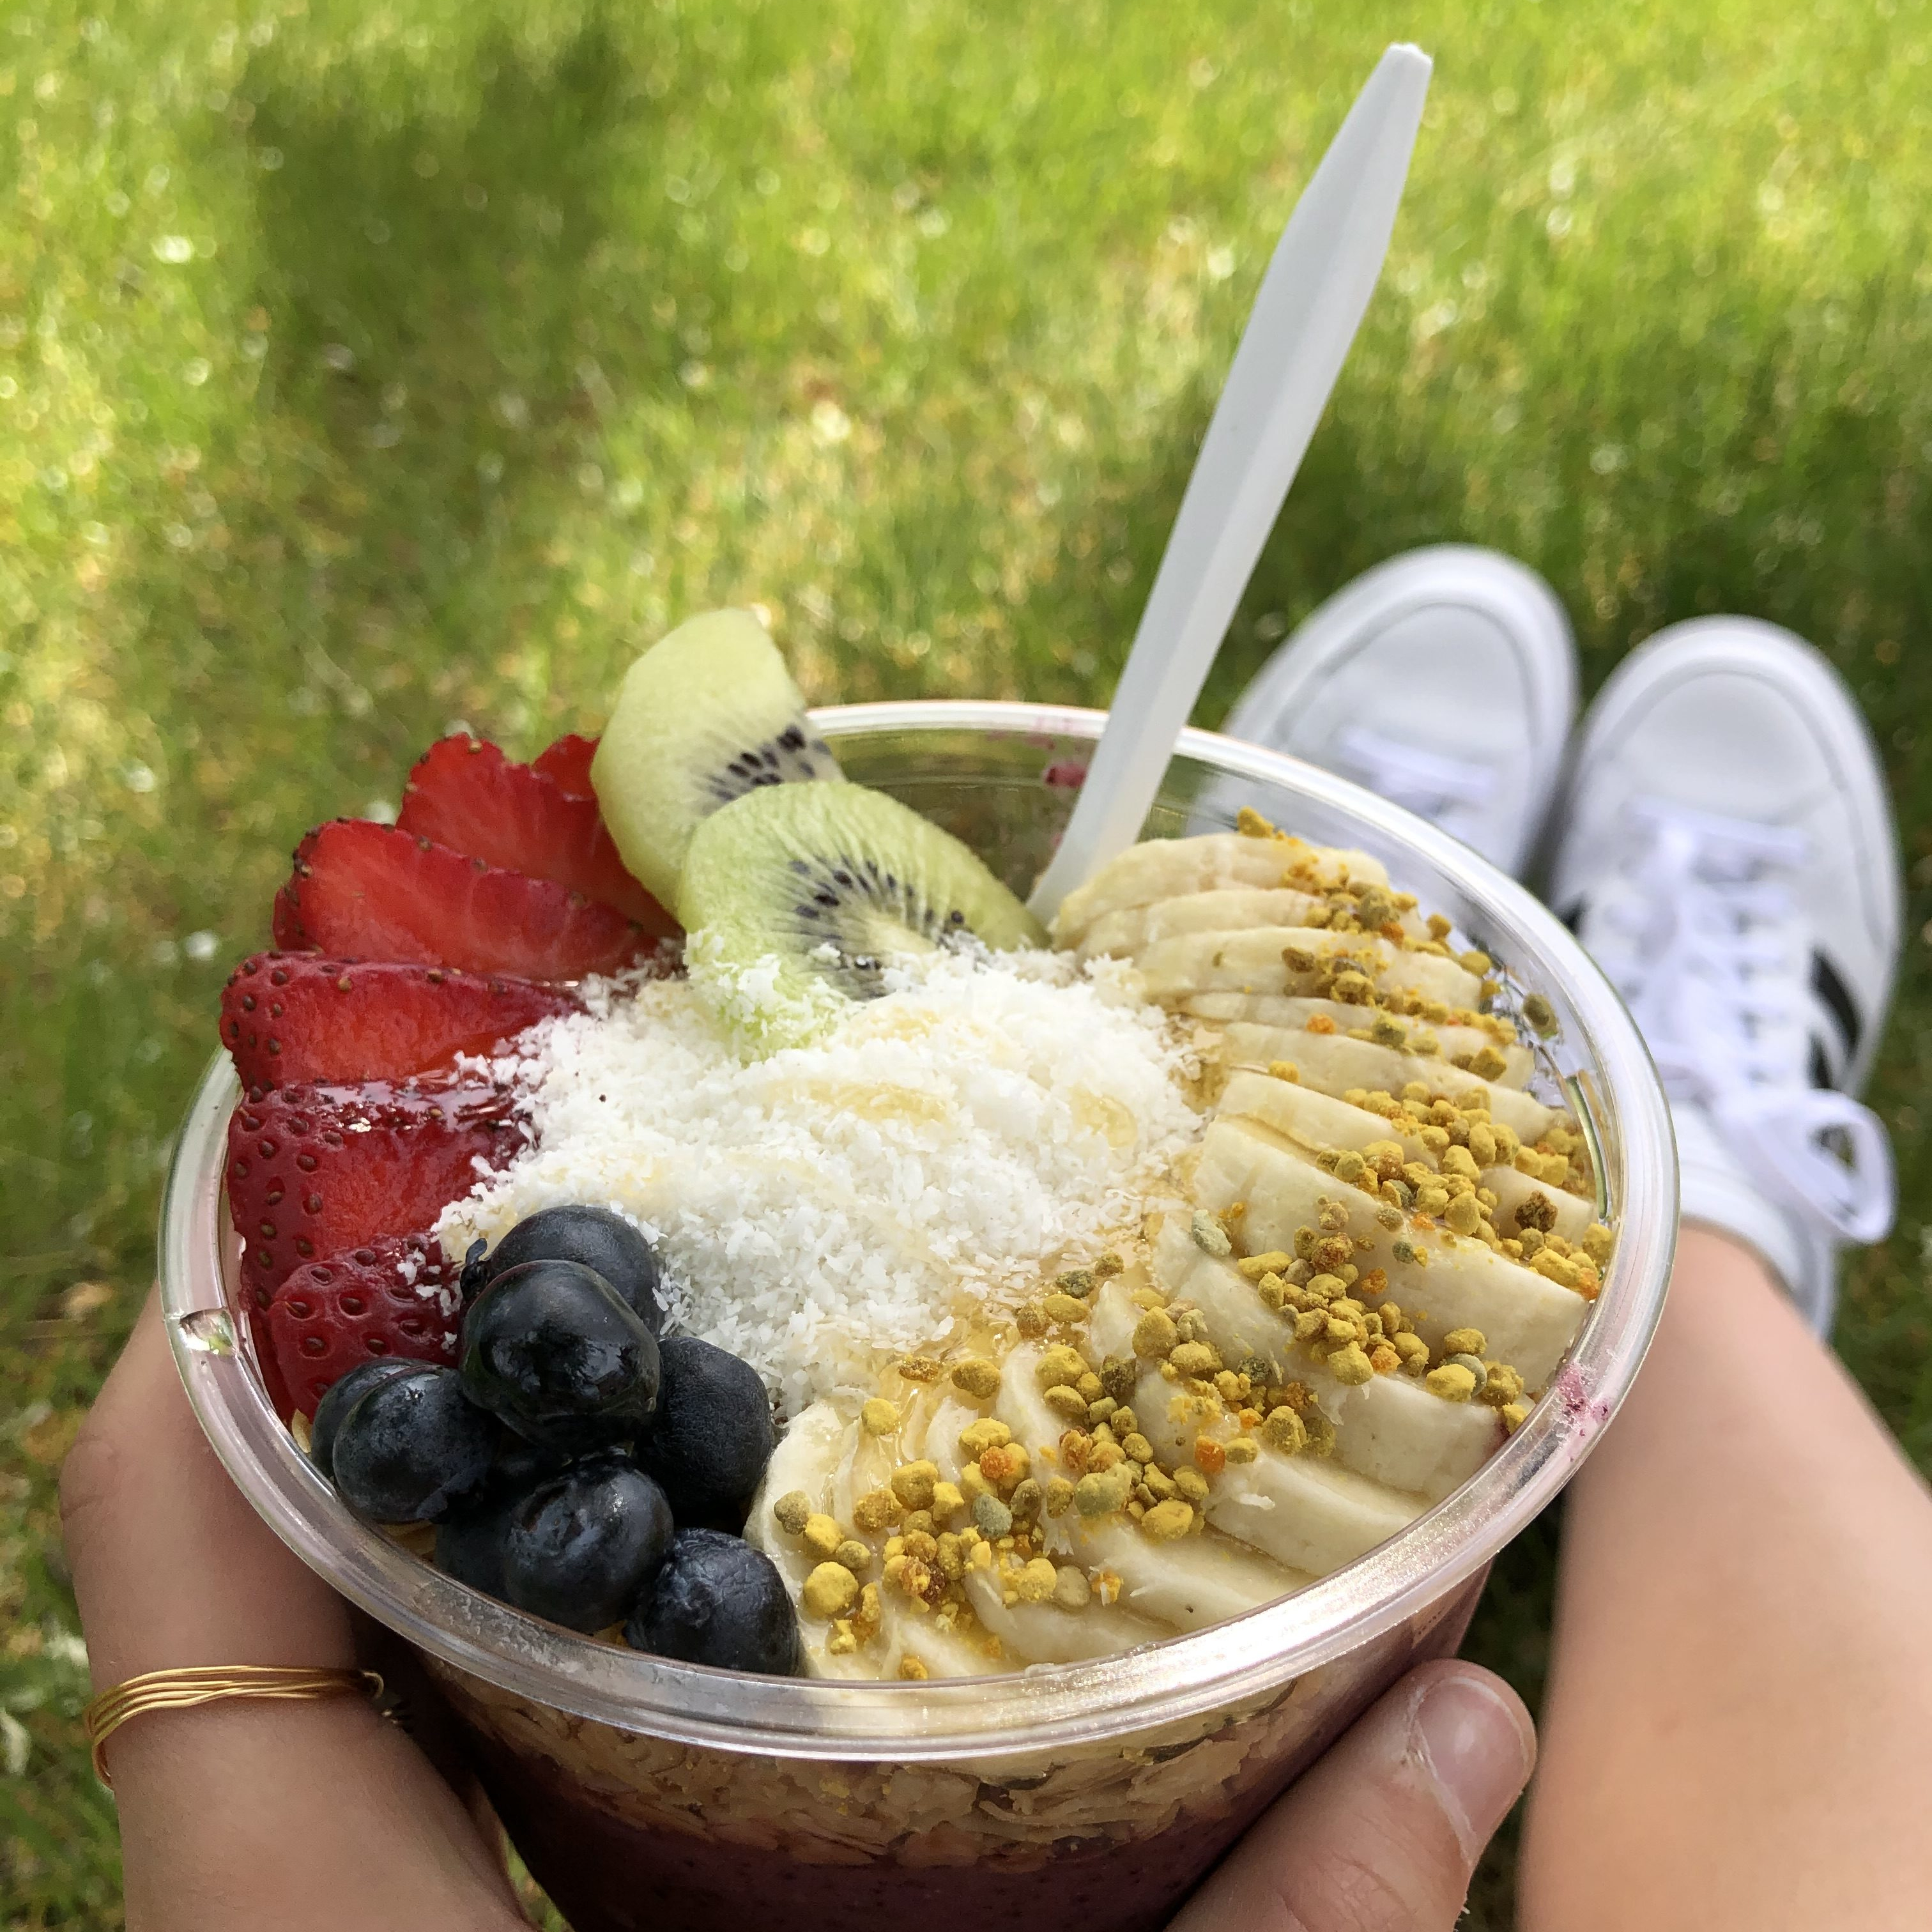 how many calories is in an acai bowl